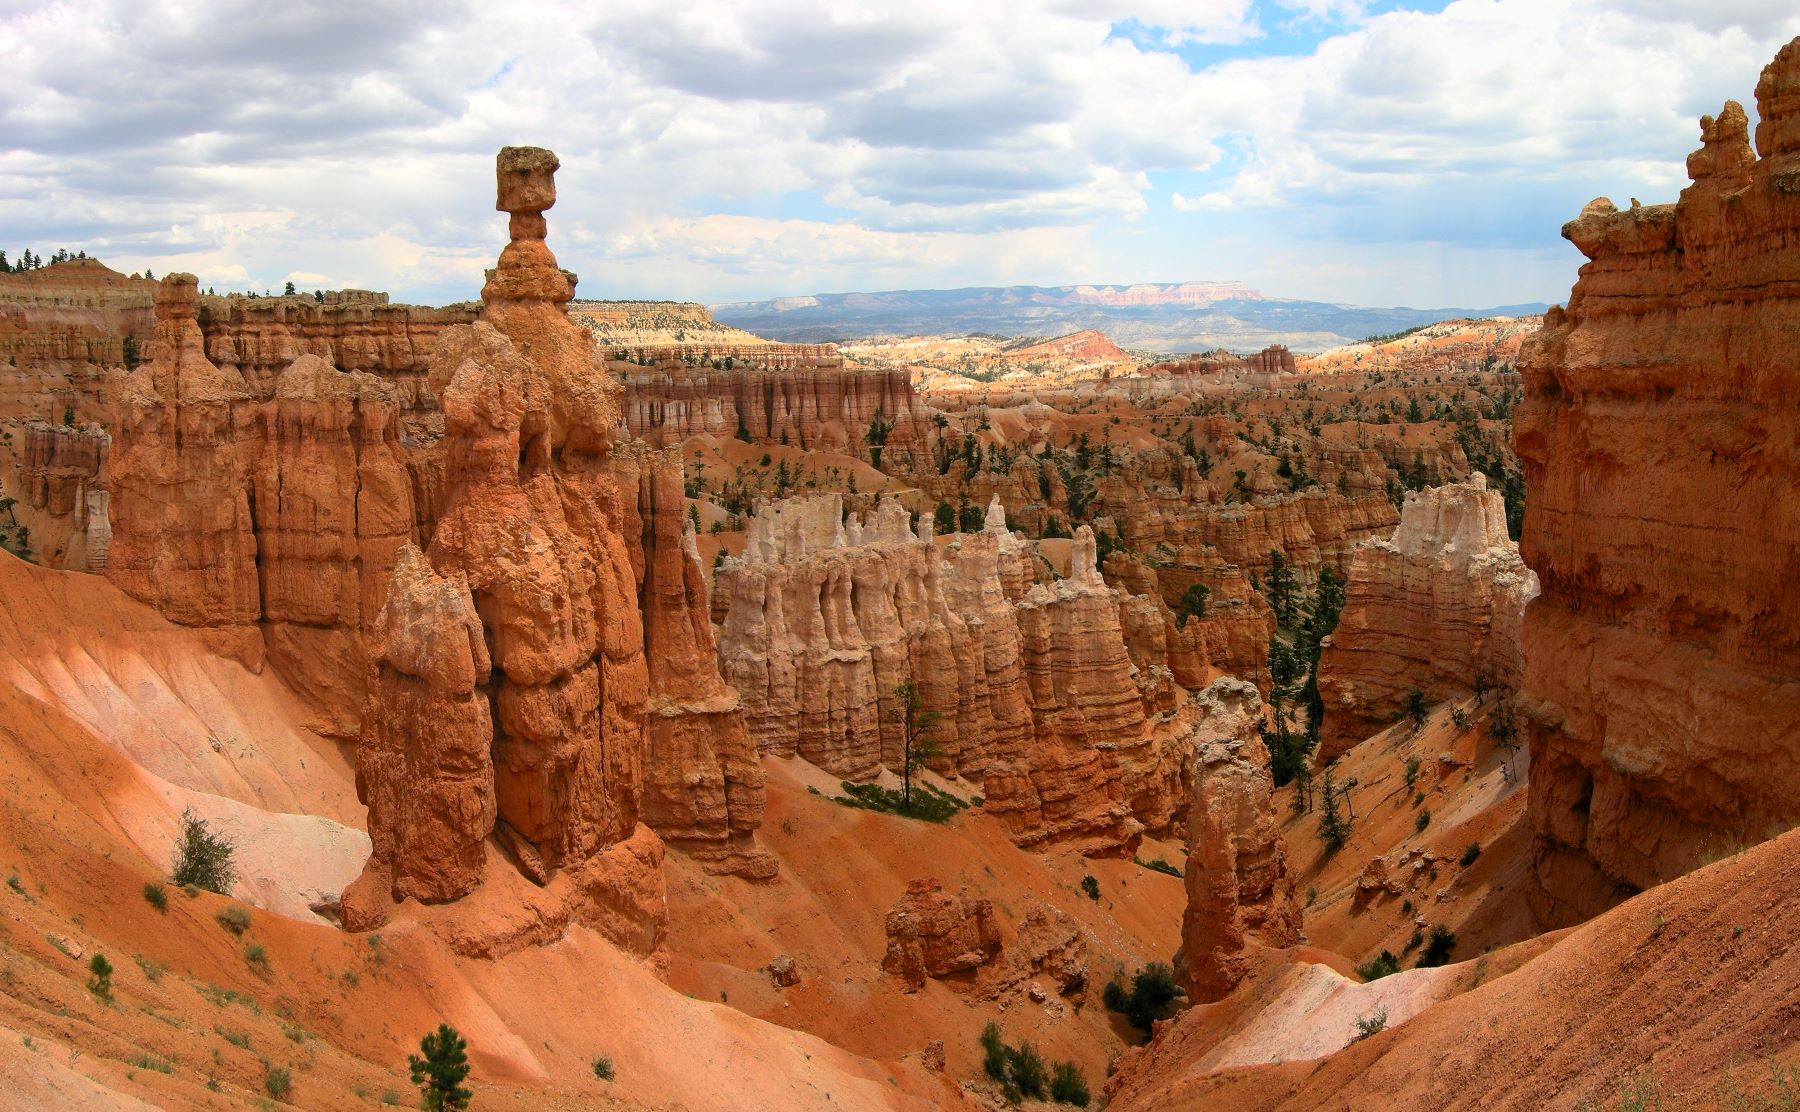 Canyon filled with pinnacles and spires of red stone